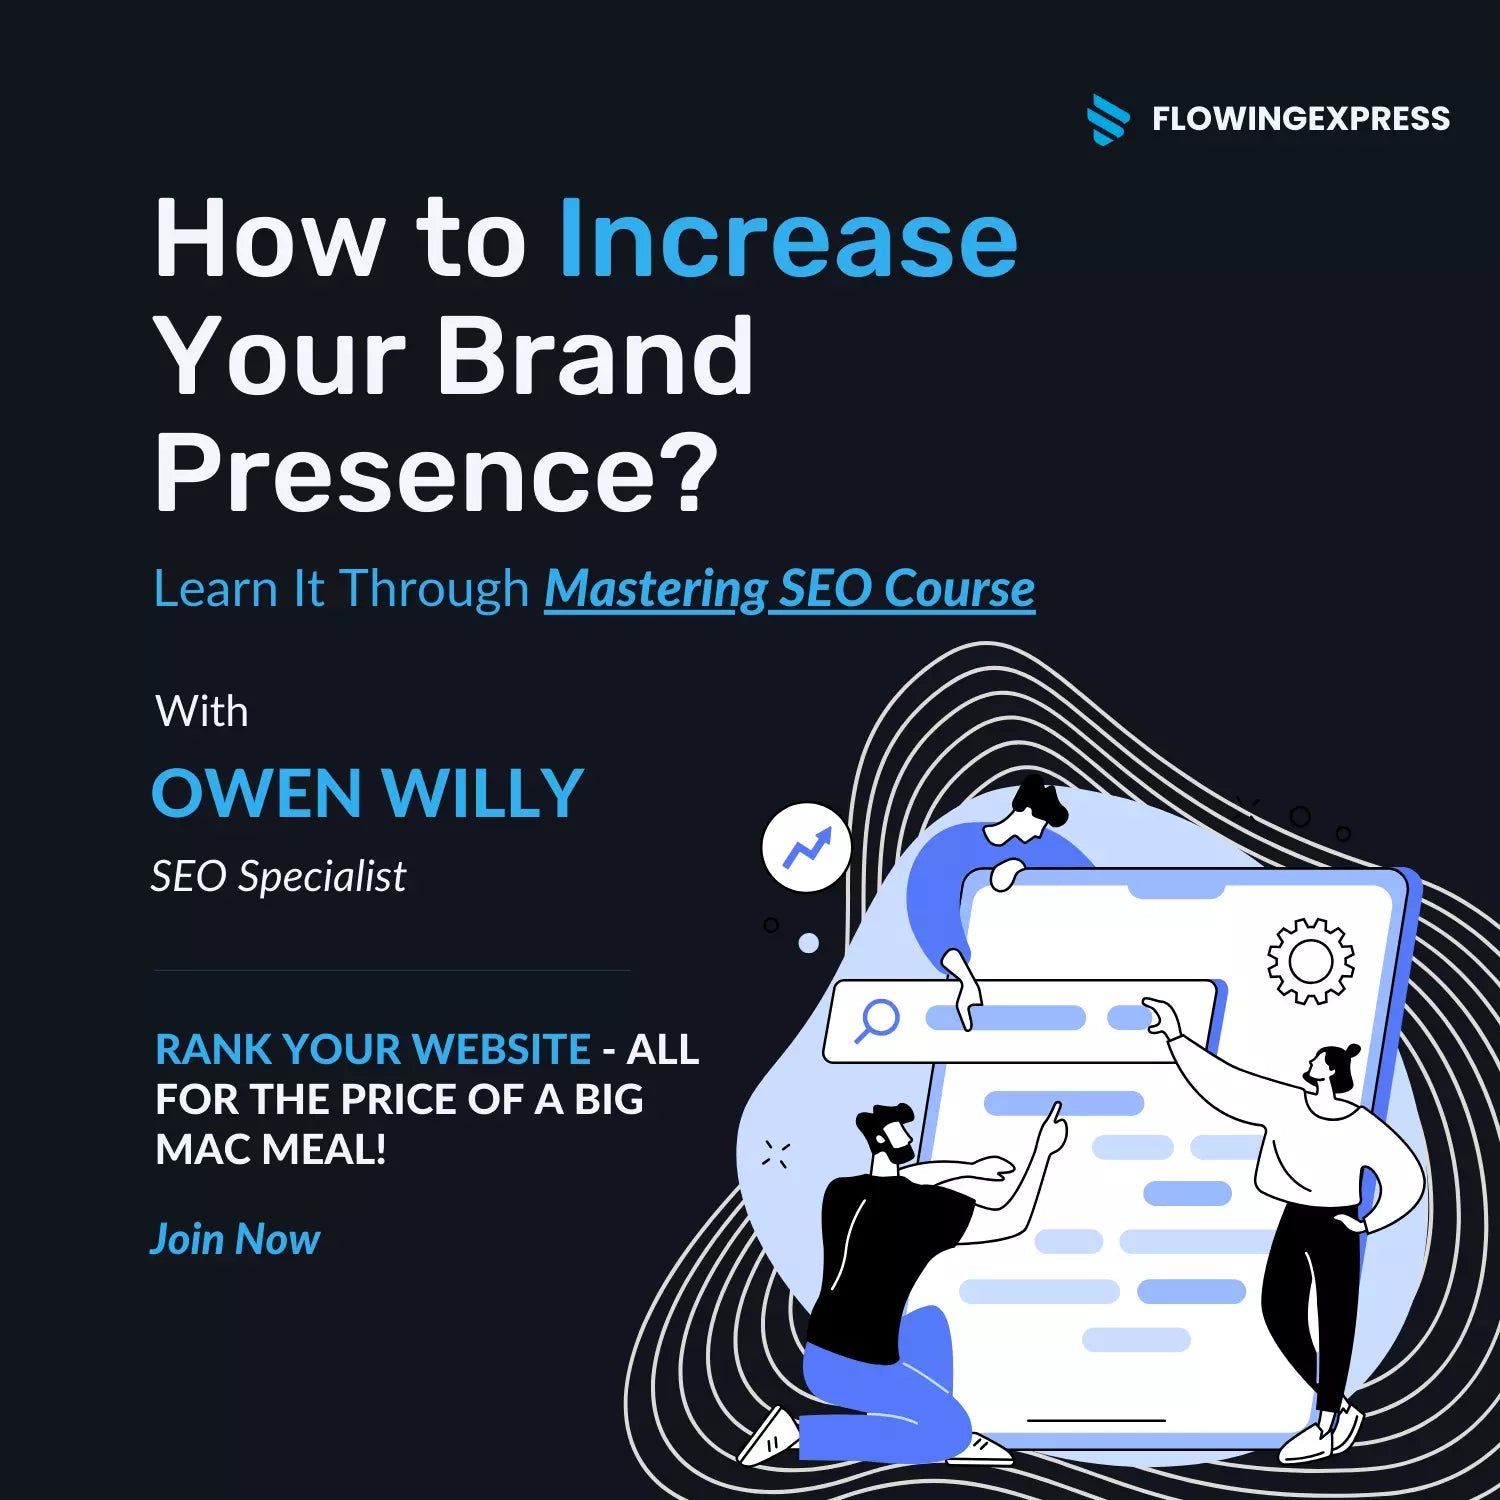 How to Increase Your Brand Presence - FlowingExpress